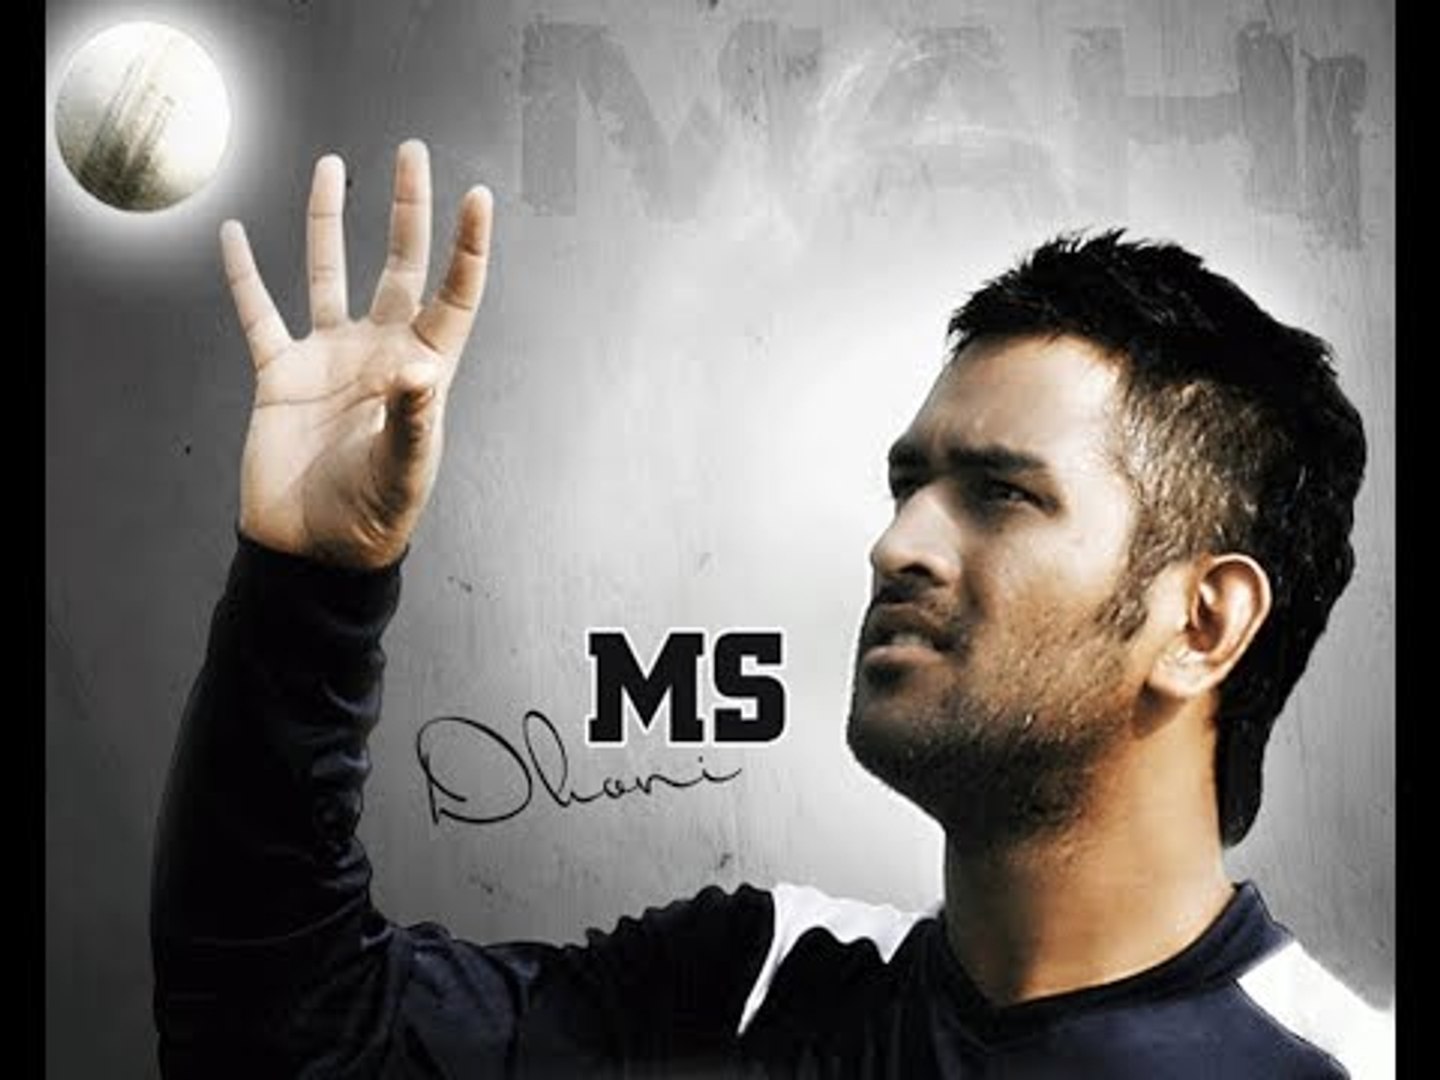 Meet these 5 people who saw Dhoni become MS Dhoni - Vidéo Dailymotion